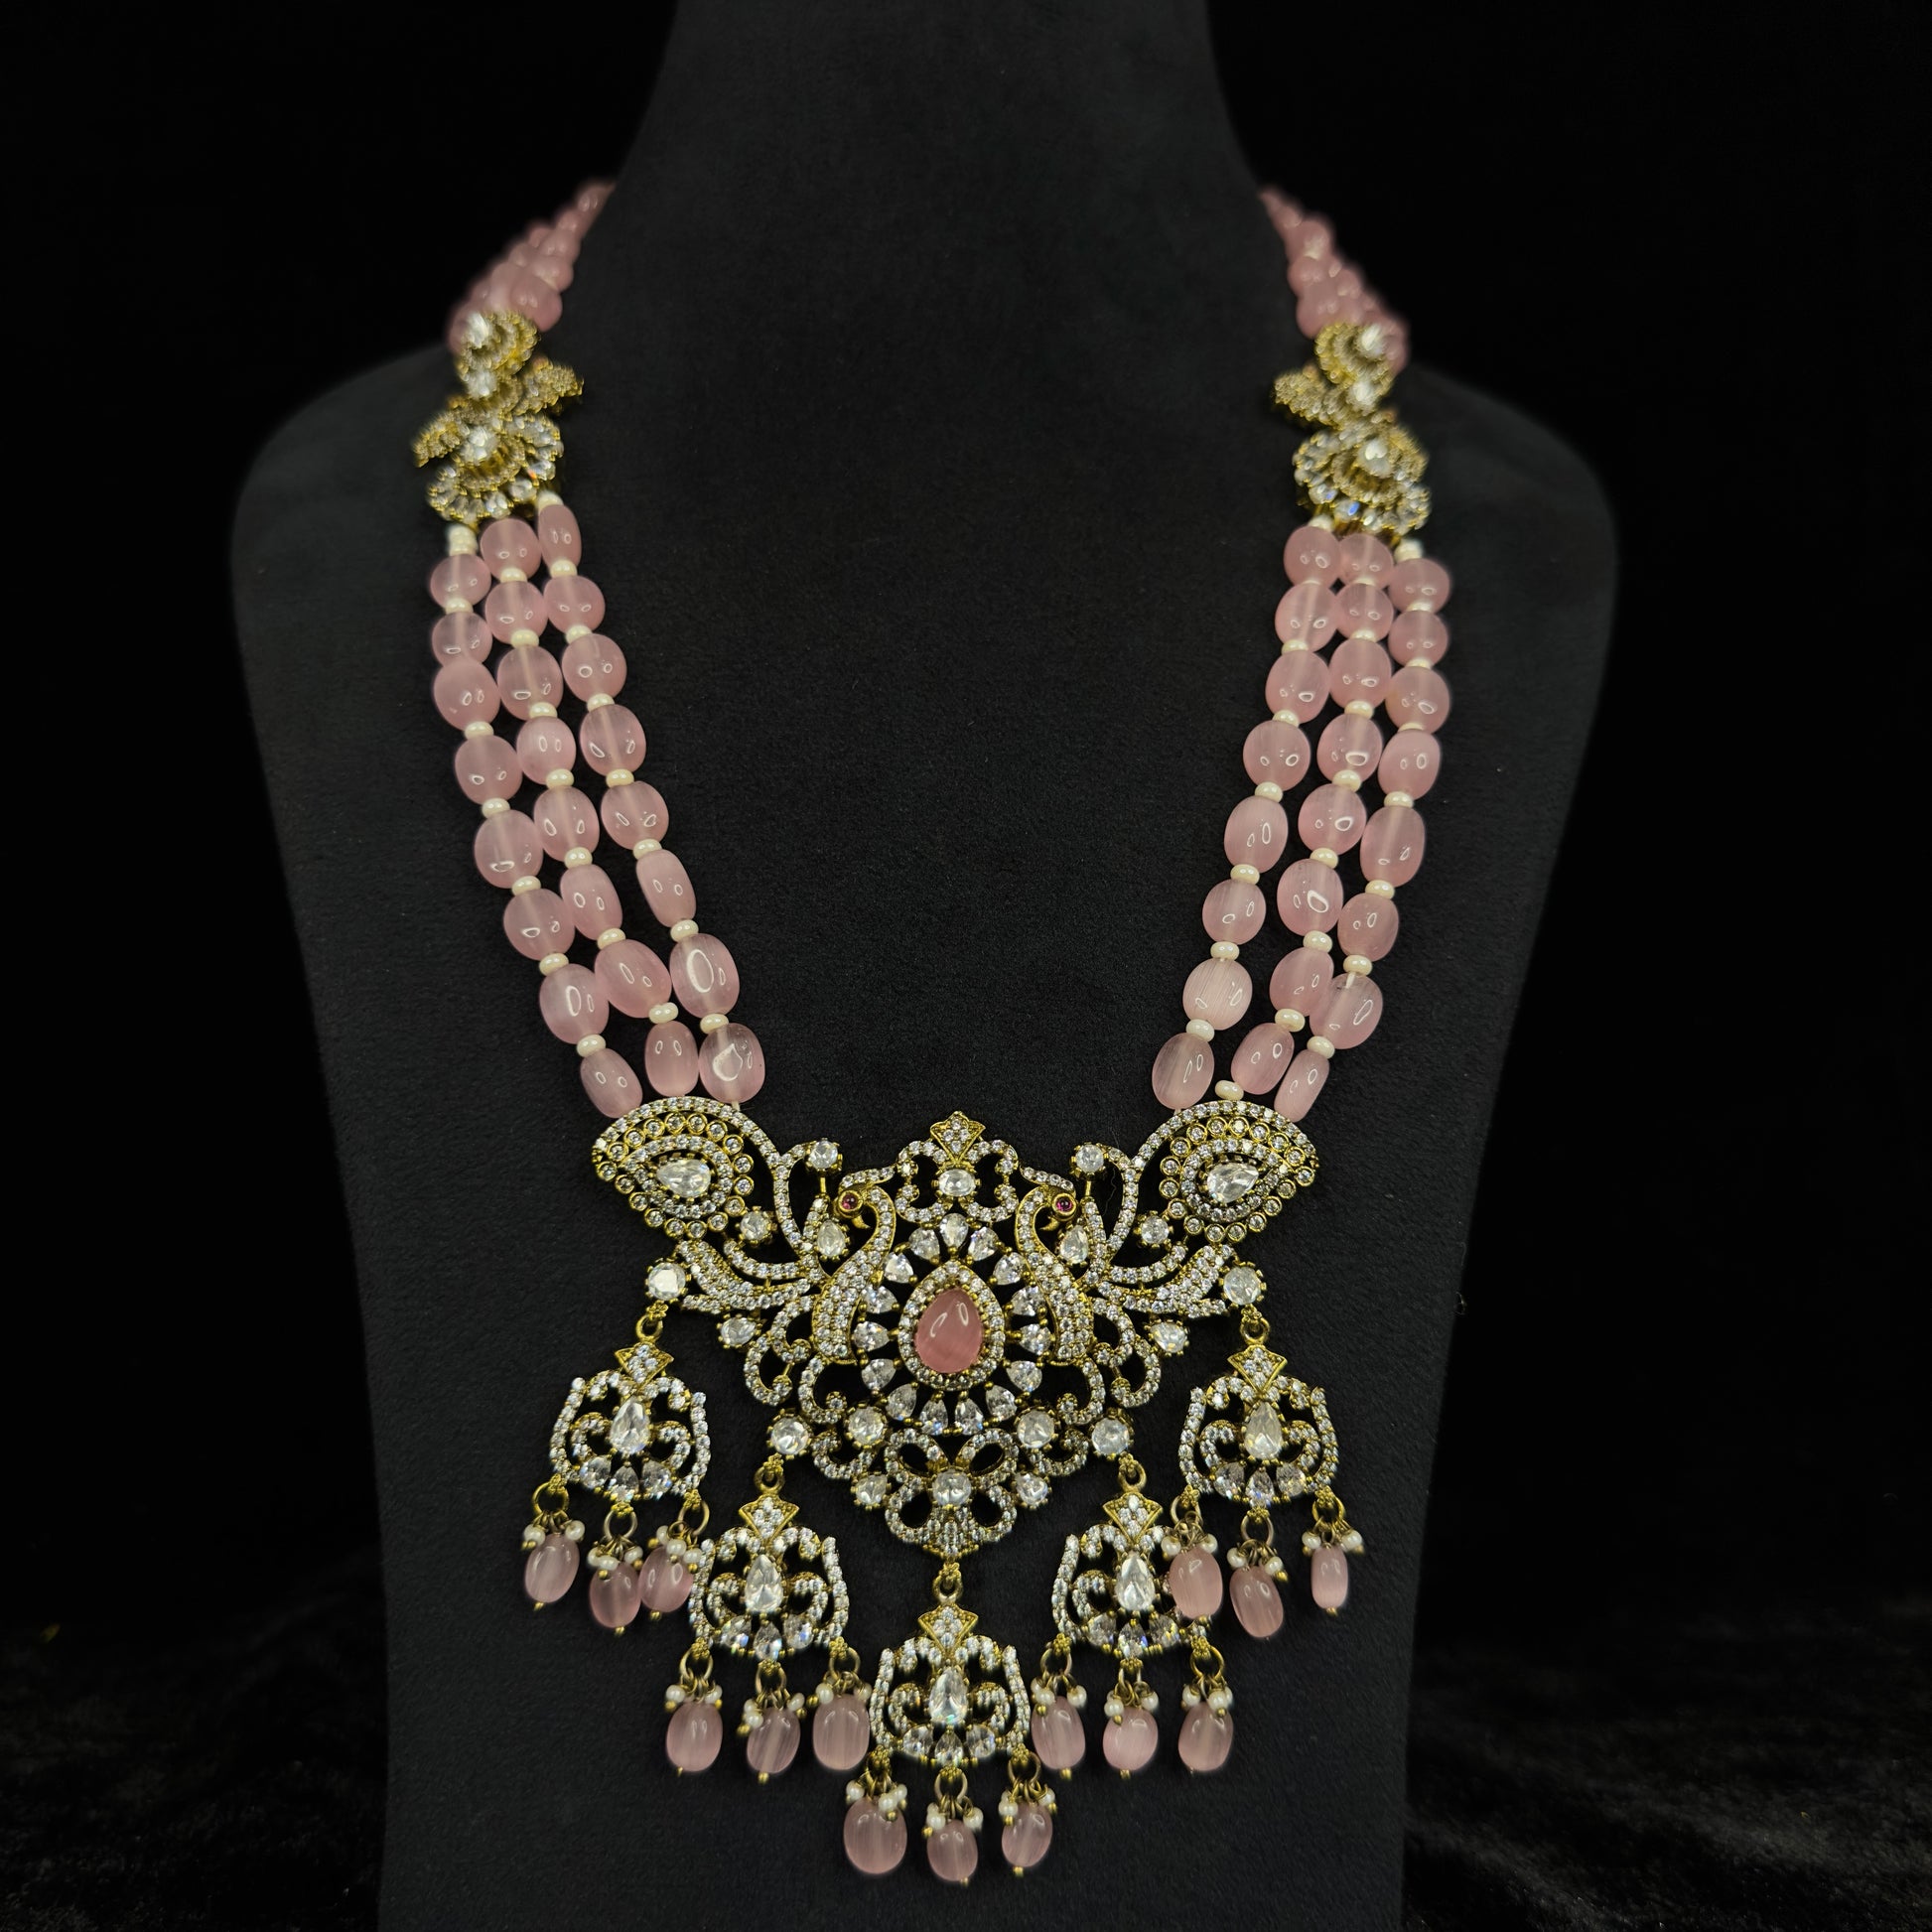 Handcrafted Zircon Beads Mala set in Victorian gold finish. This Victorian Jewellery Is available in Red & Pink colour varaiants.